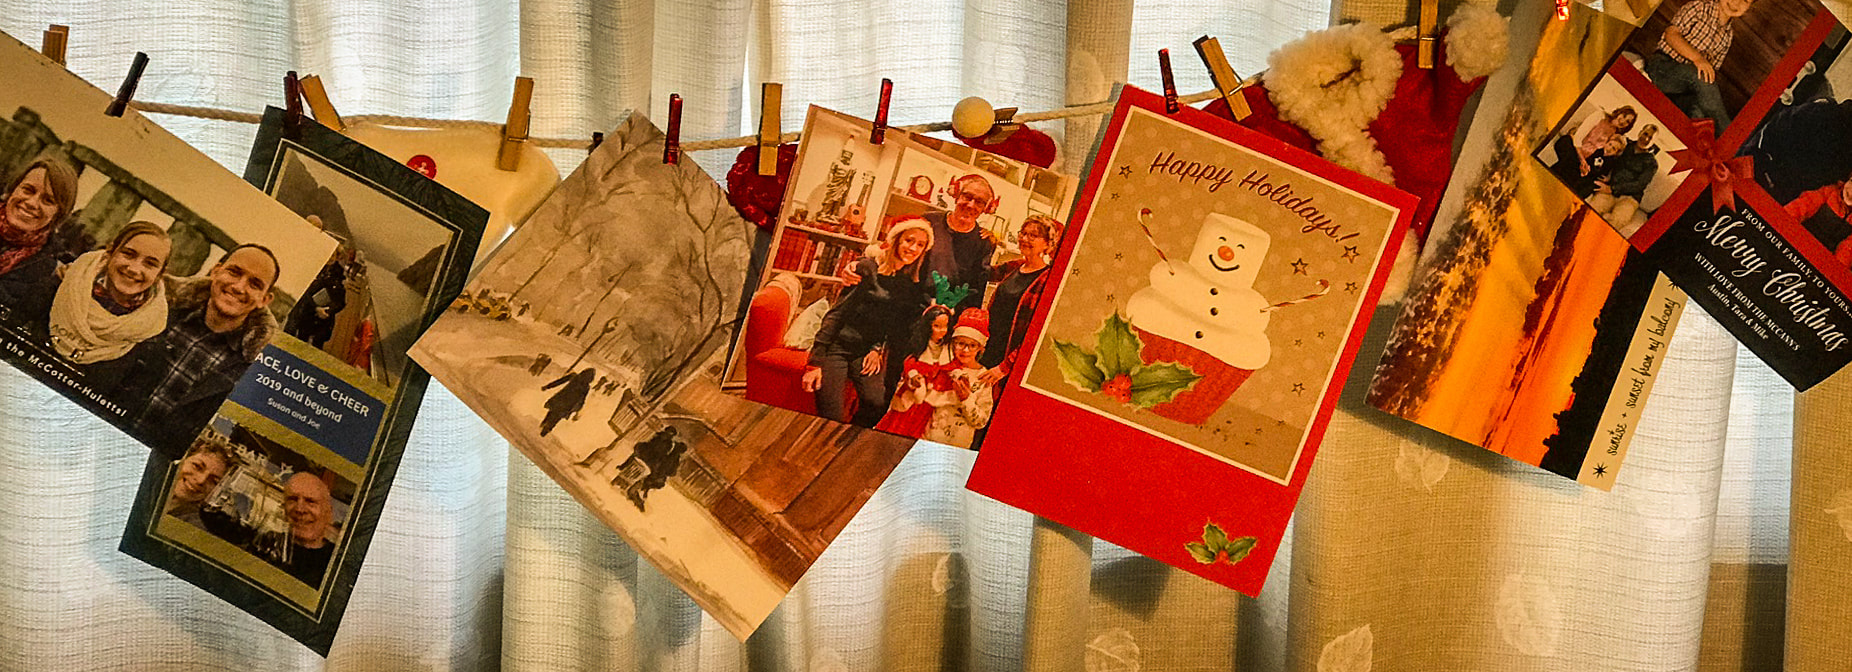 Holiday cards are love letters / 36 Years Ago Today / Karen McCann / EnjoyLivingAbroad.com